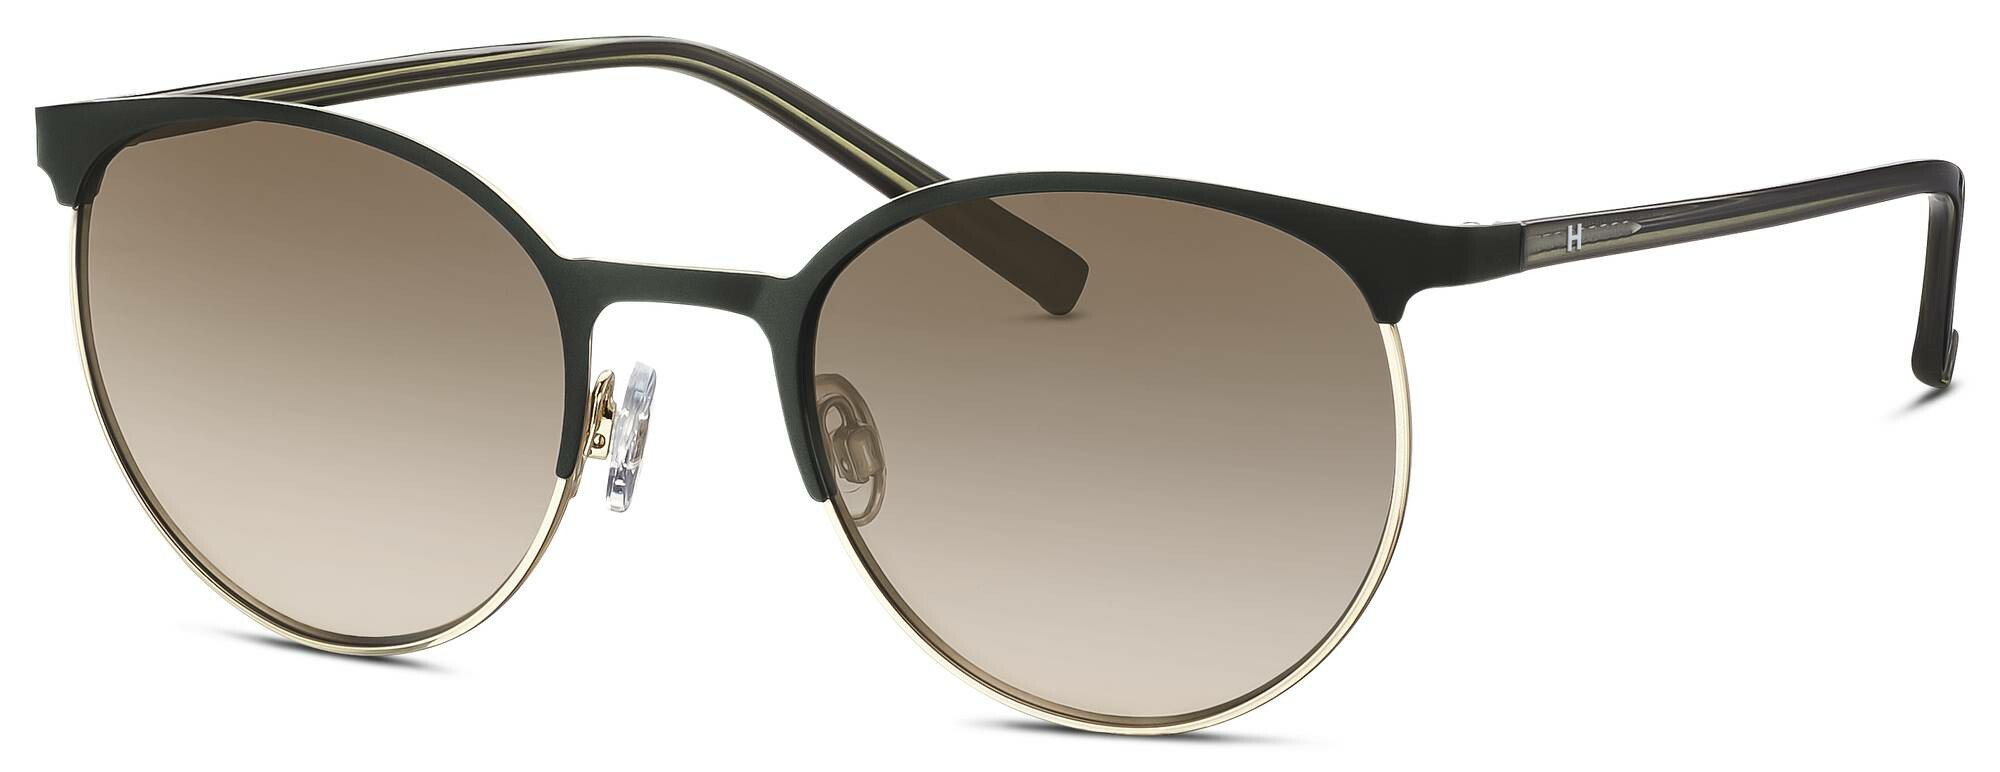 [products.image.front] HUMPHREY´S eyewear 585262 301069 Sonnenbrille